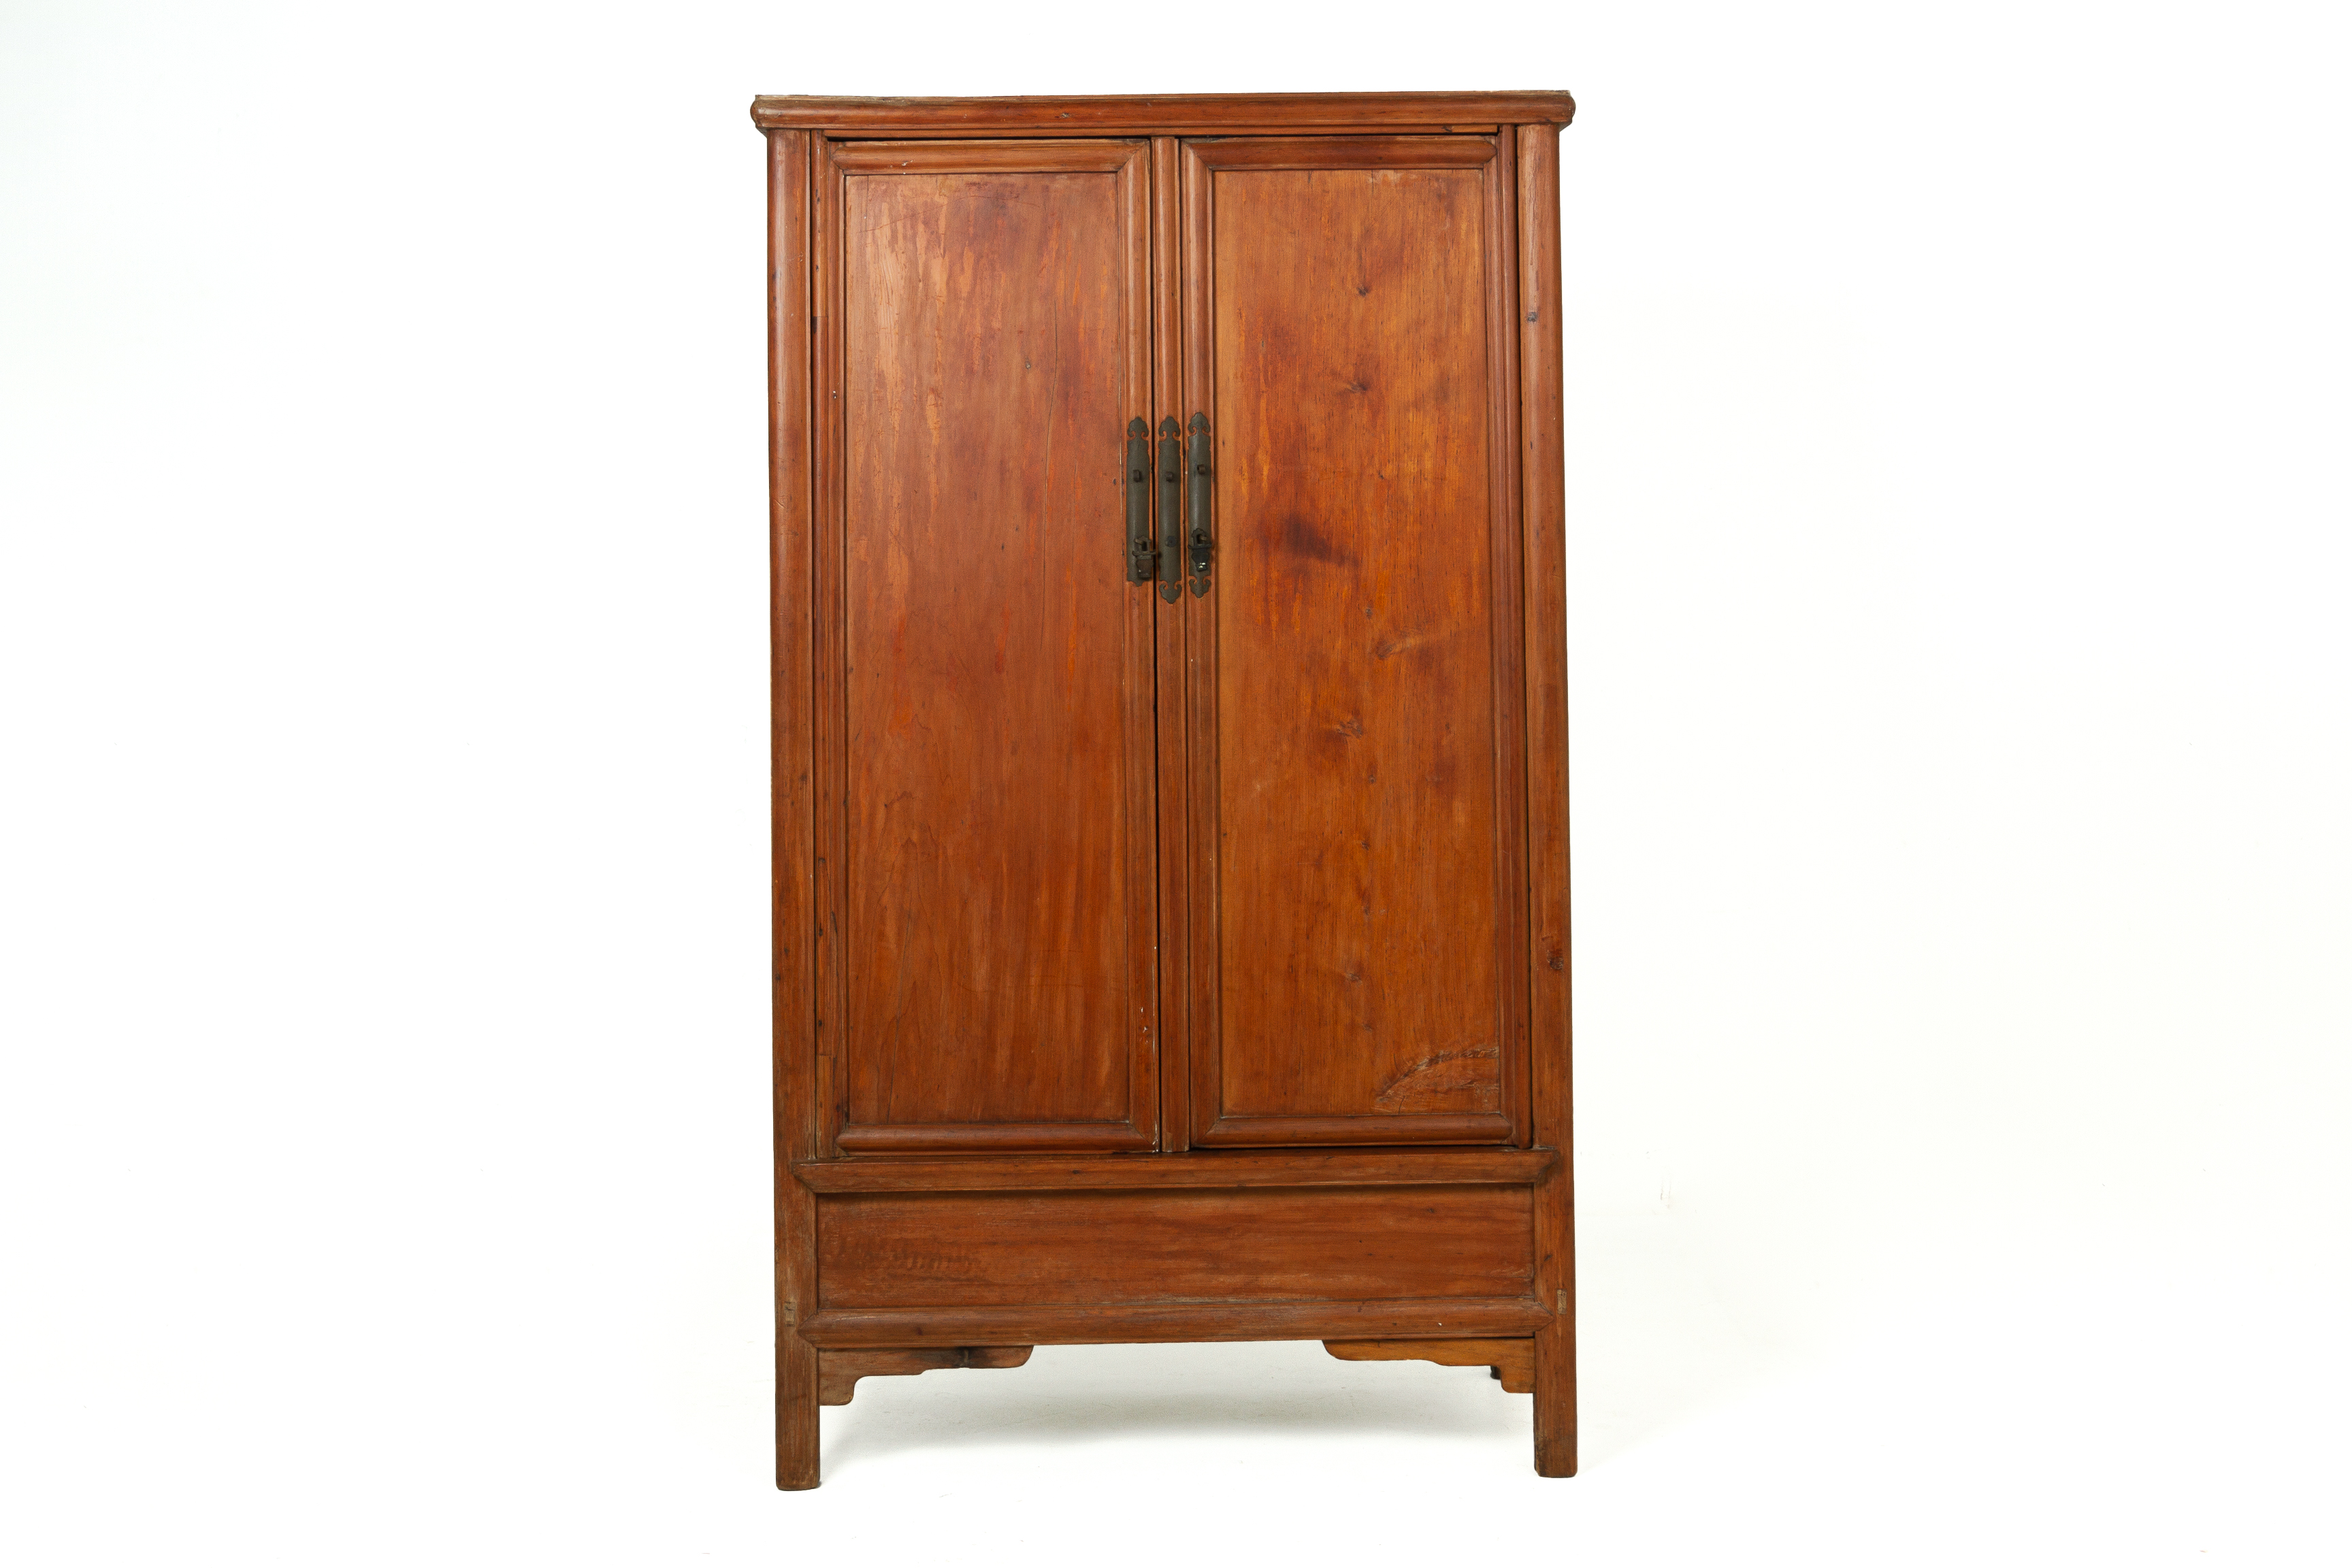 A LARGE CHINESE WOODEN CABINET